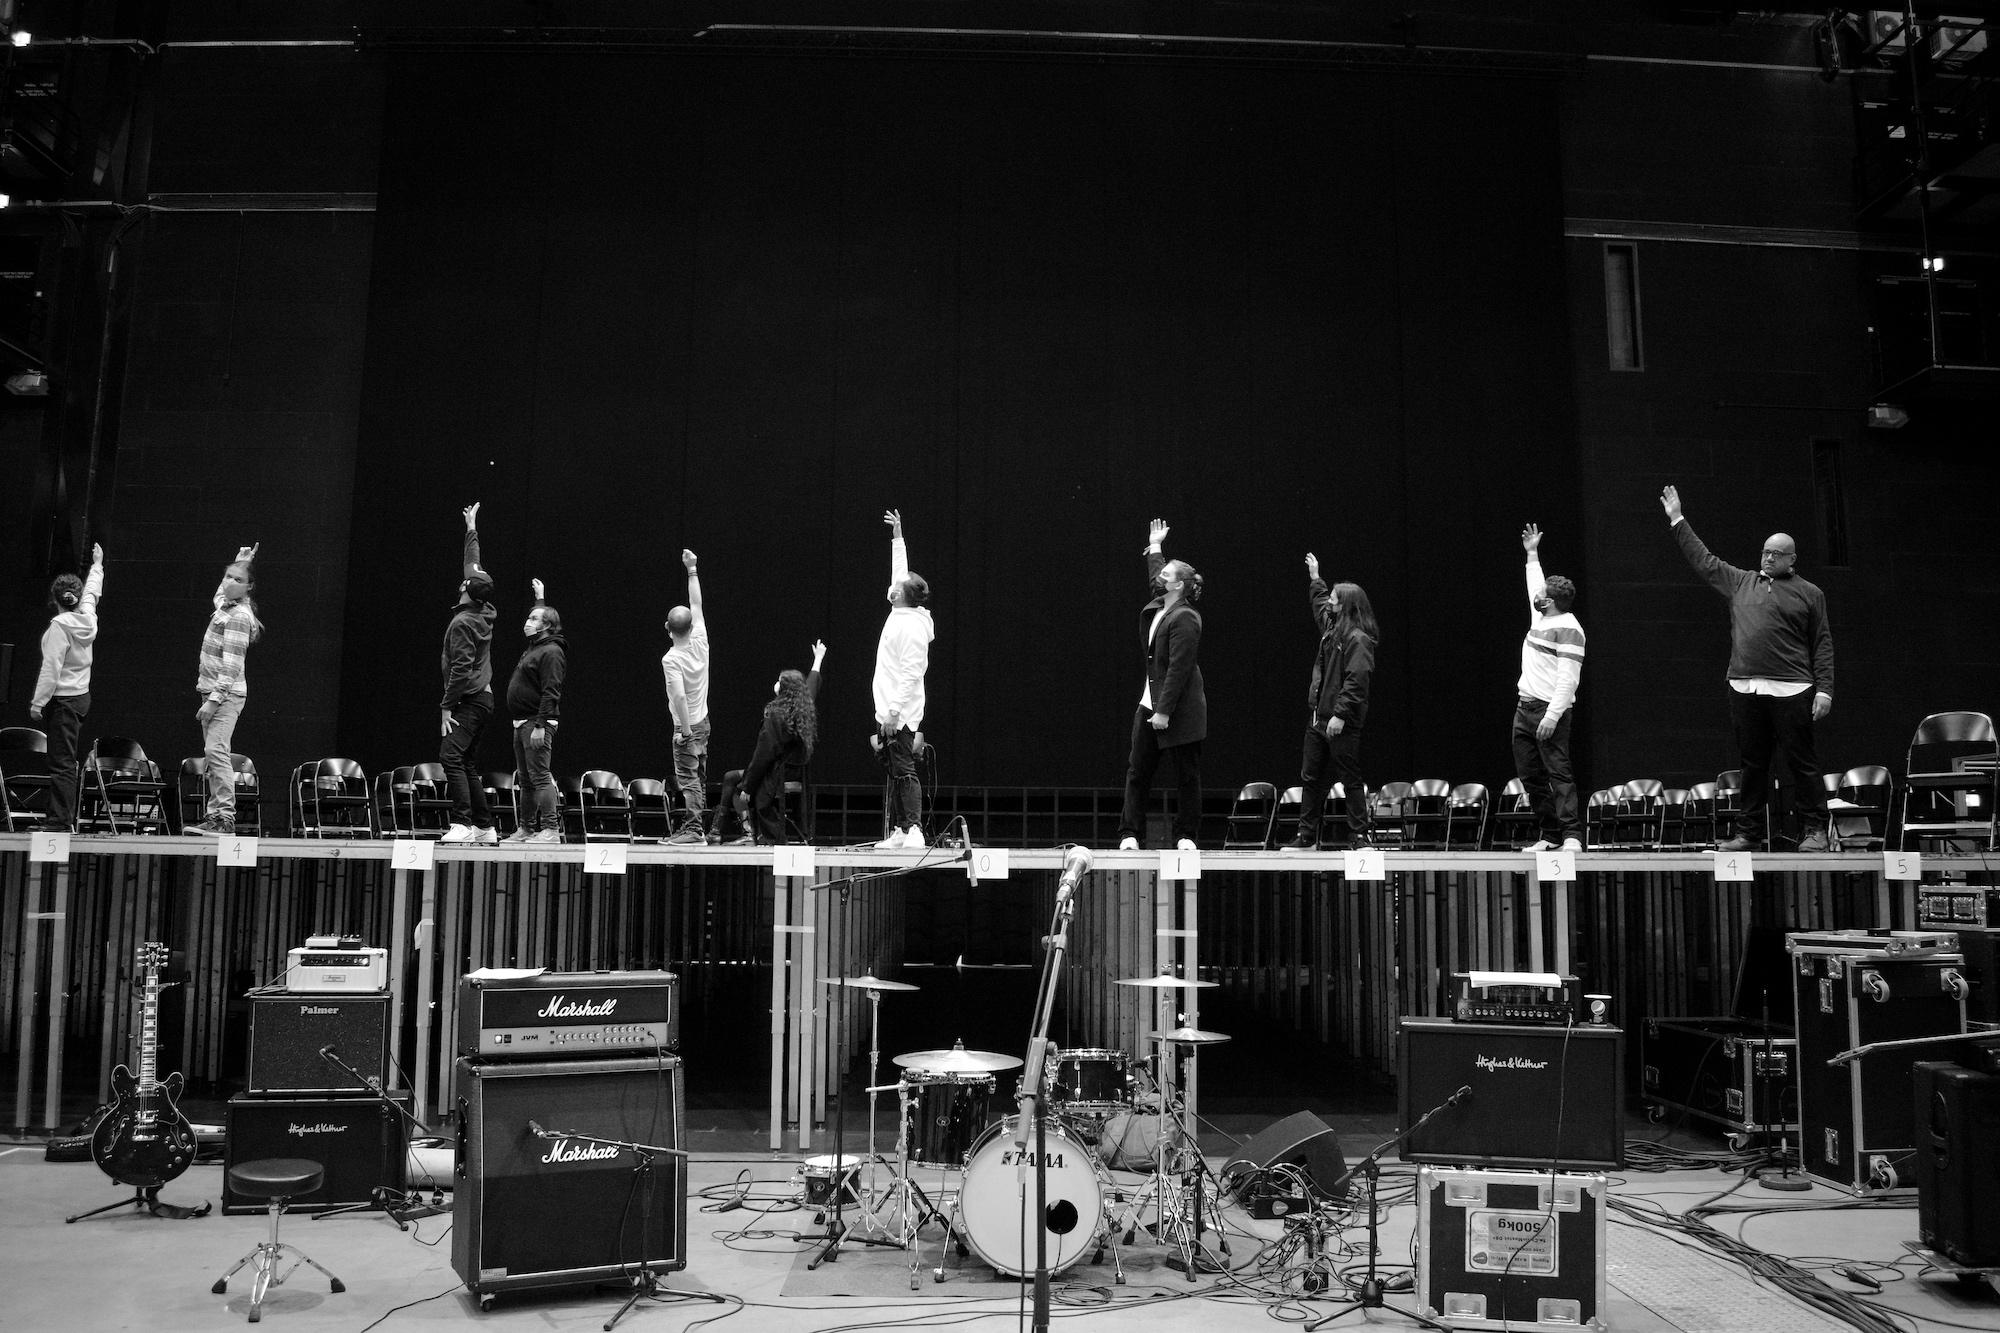 11 people stand on stage rehearsing for a performance. They all have their left hand in the air.